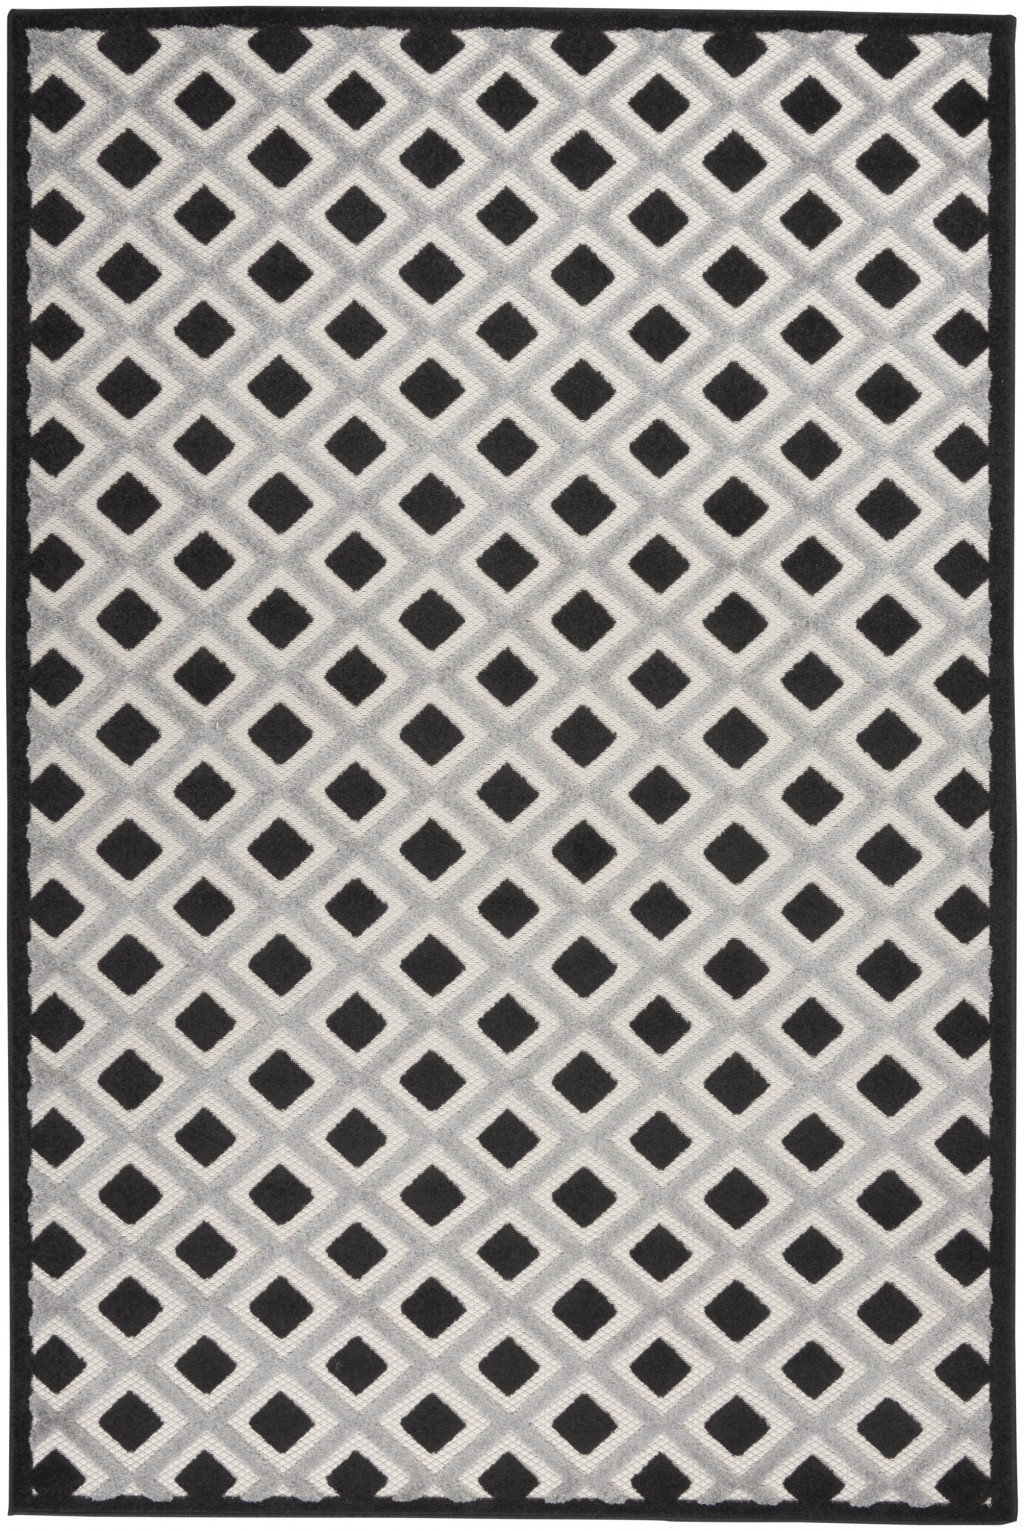 6' X 9' Black And White Geometric Indoor Outdoor Area Rug-385142-1